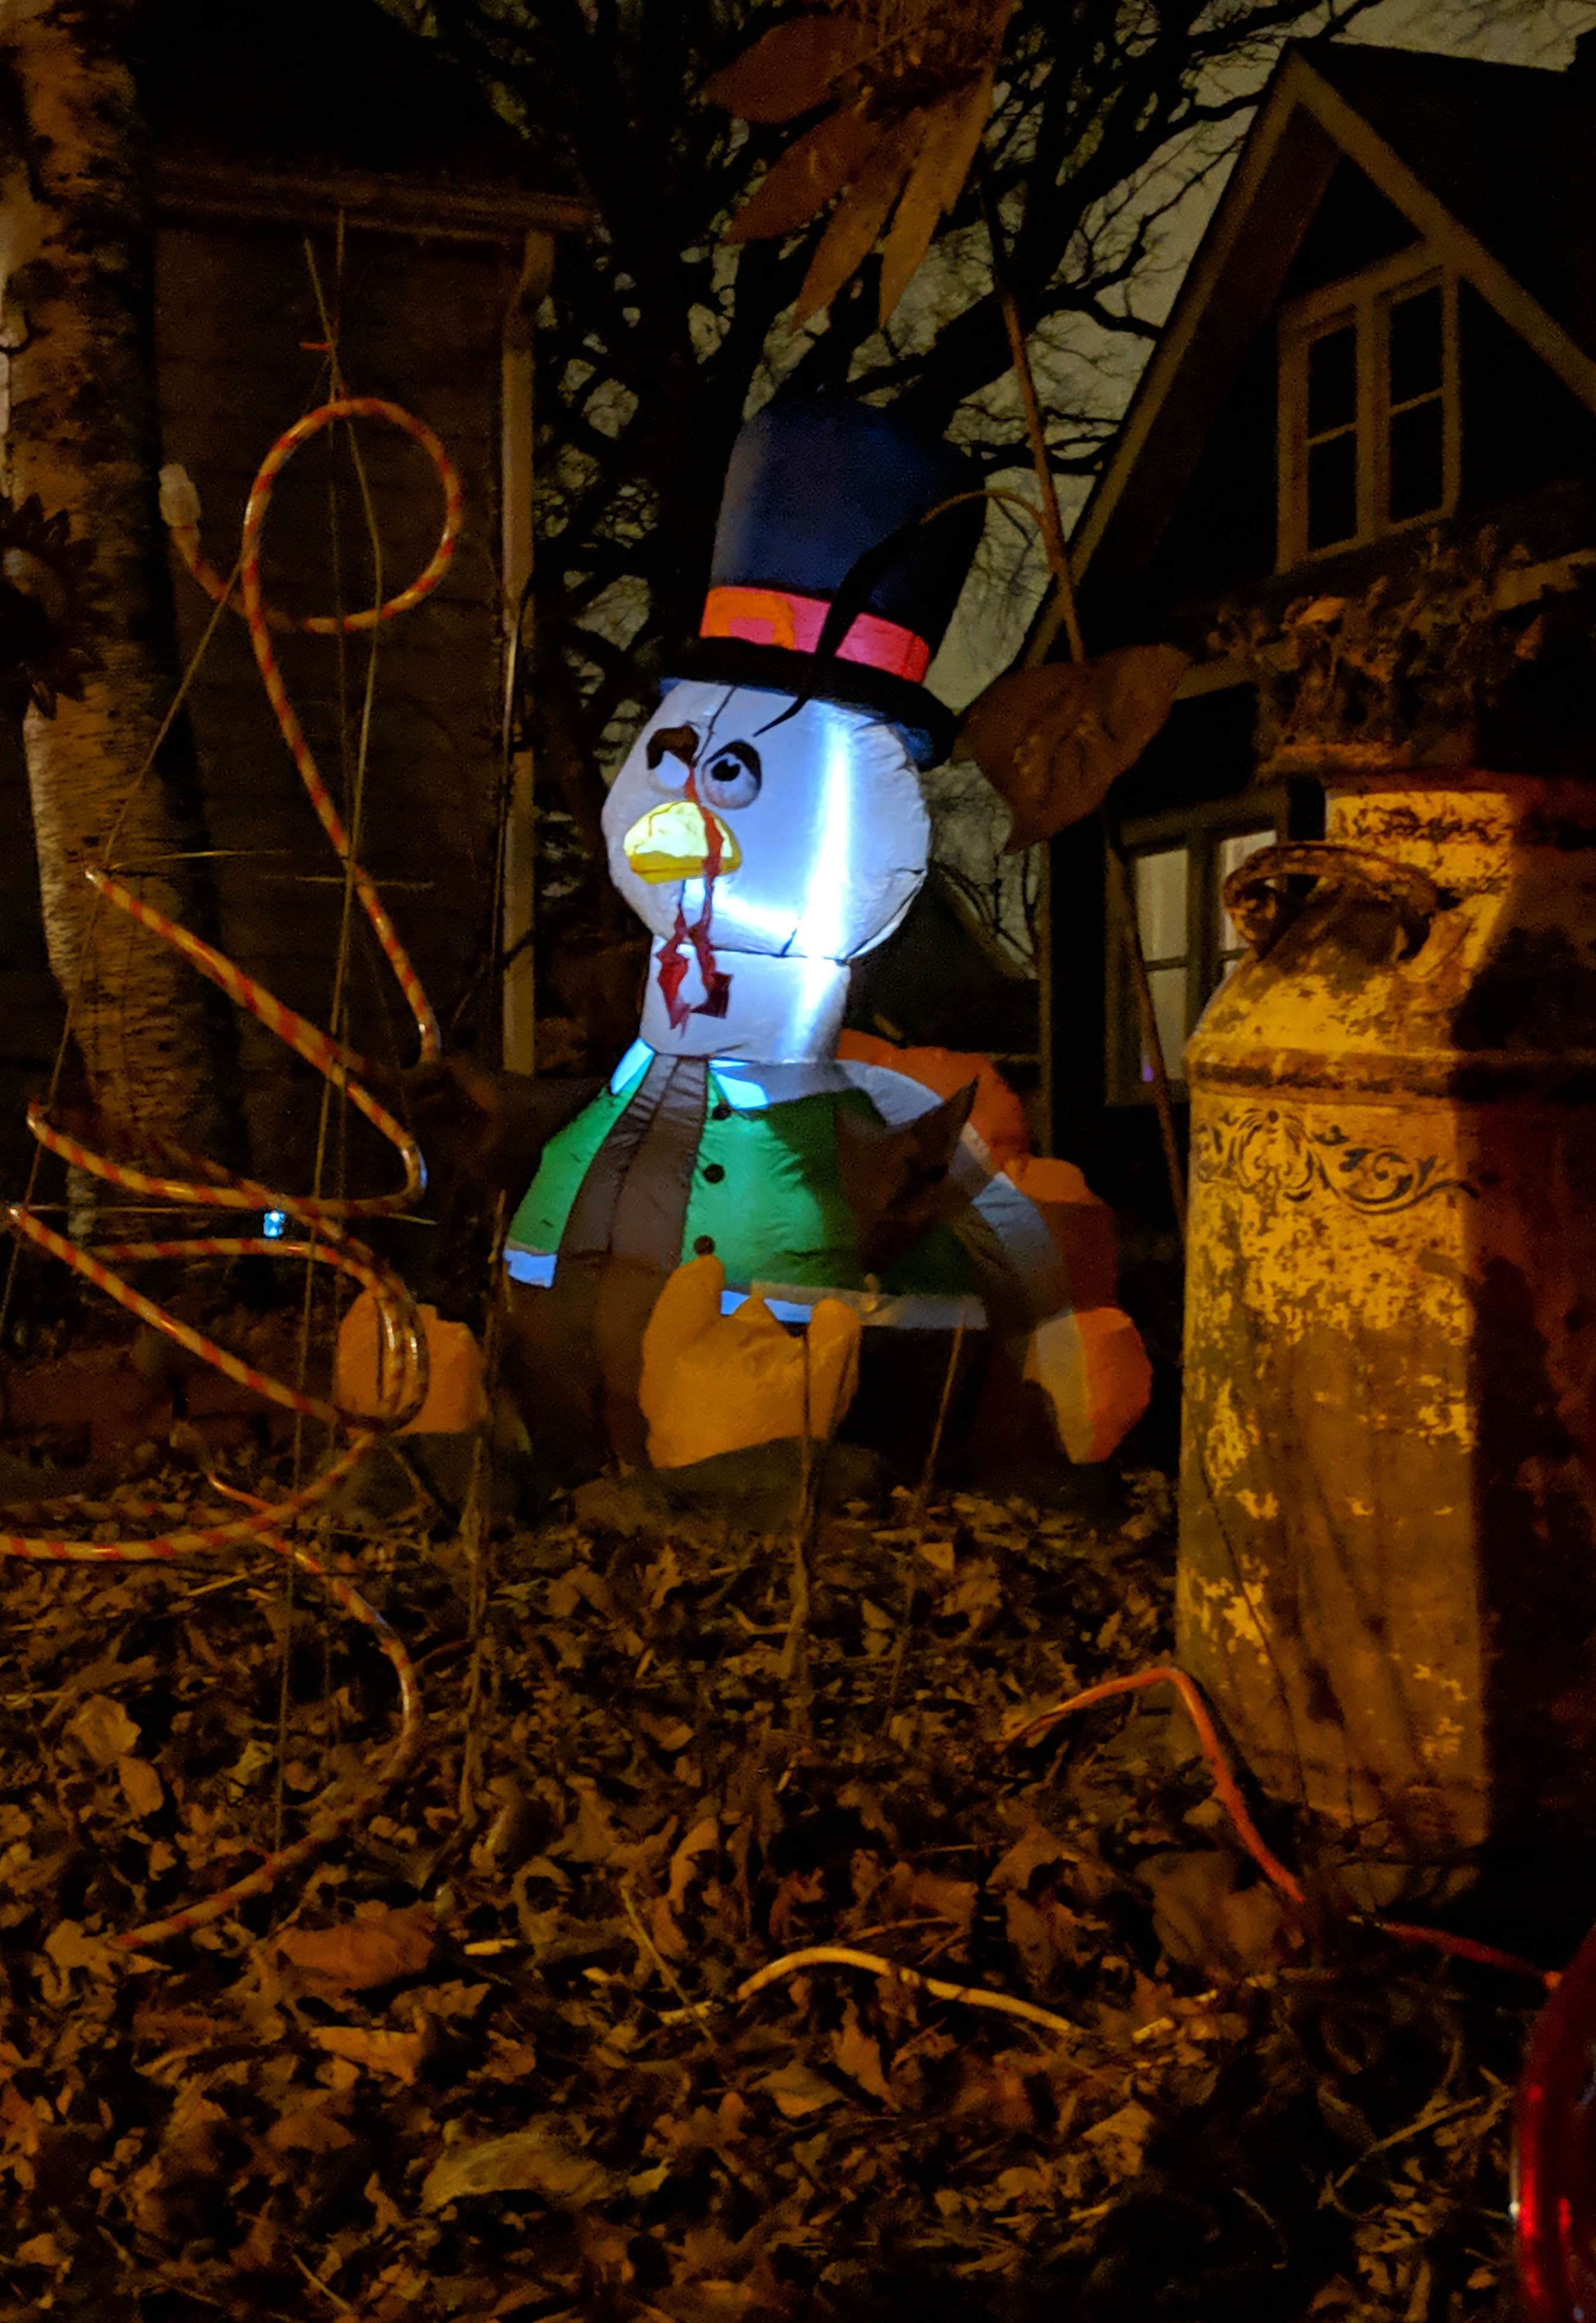 Inflated lighted turkey in yard at night